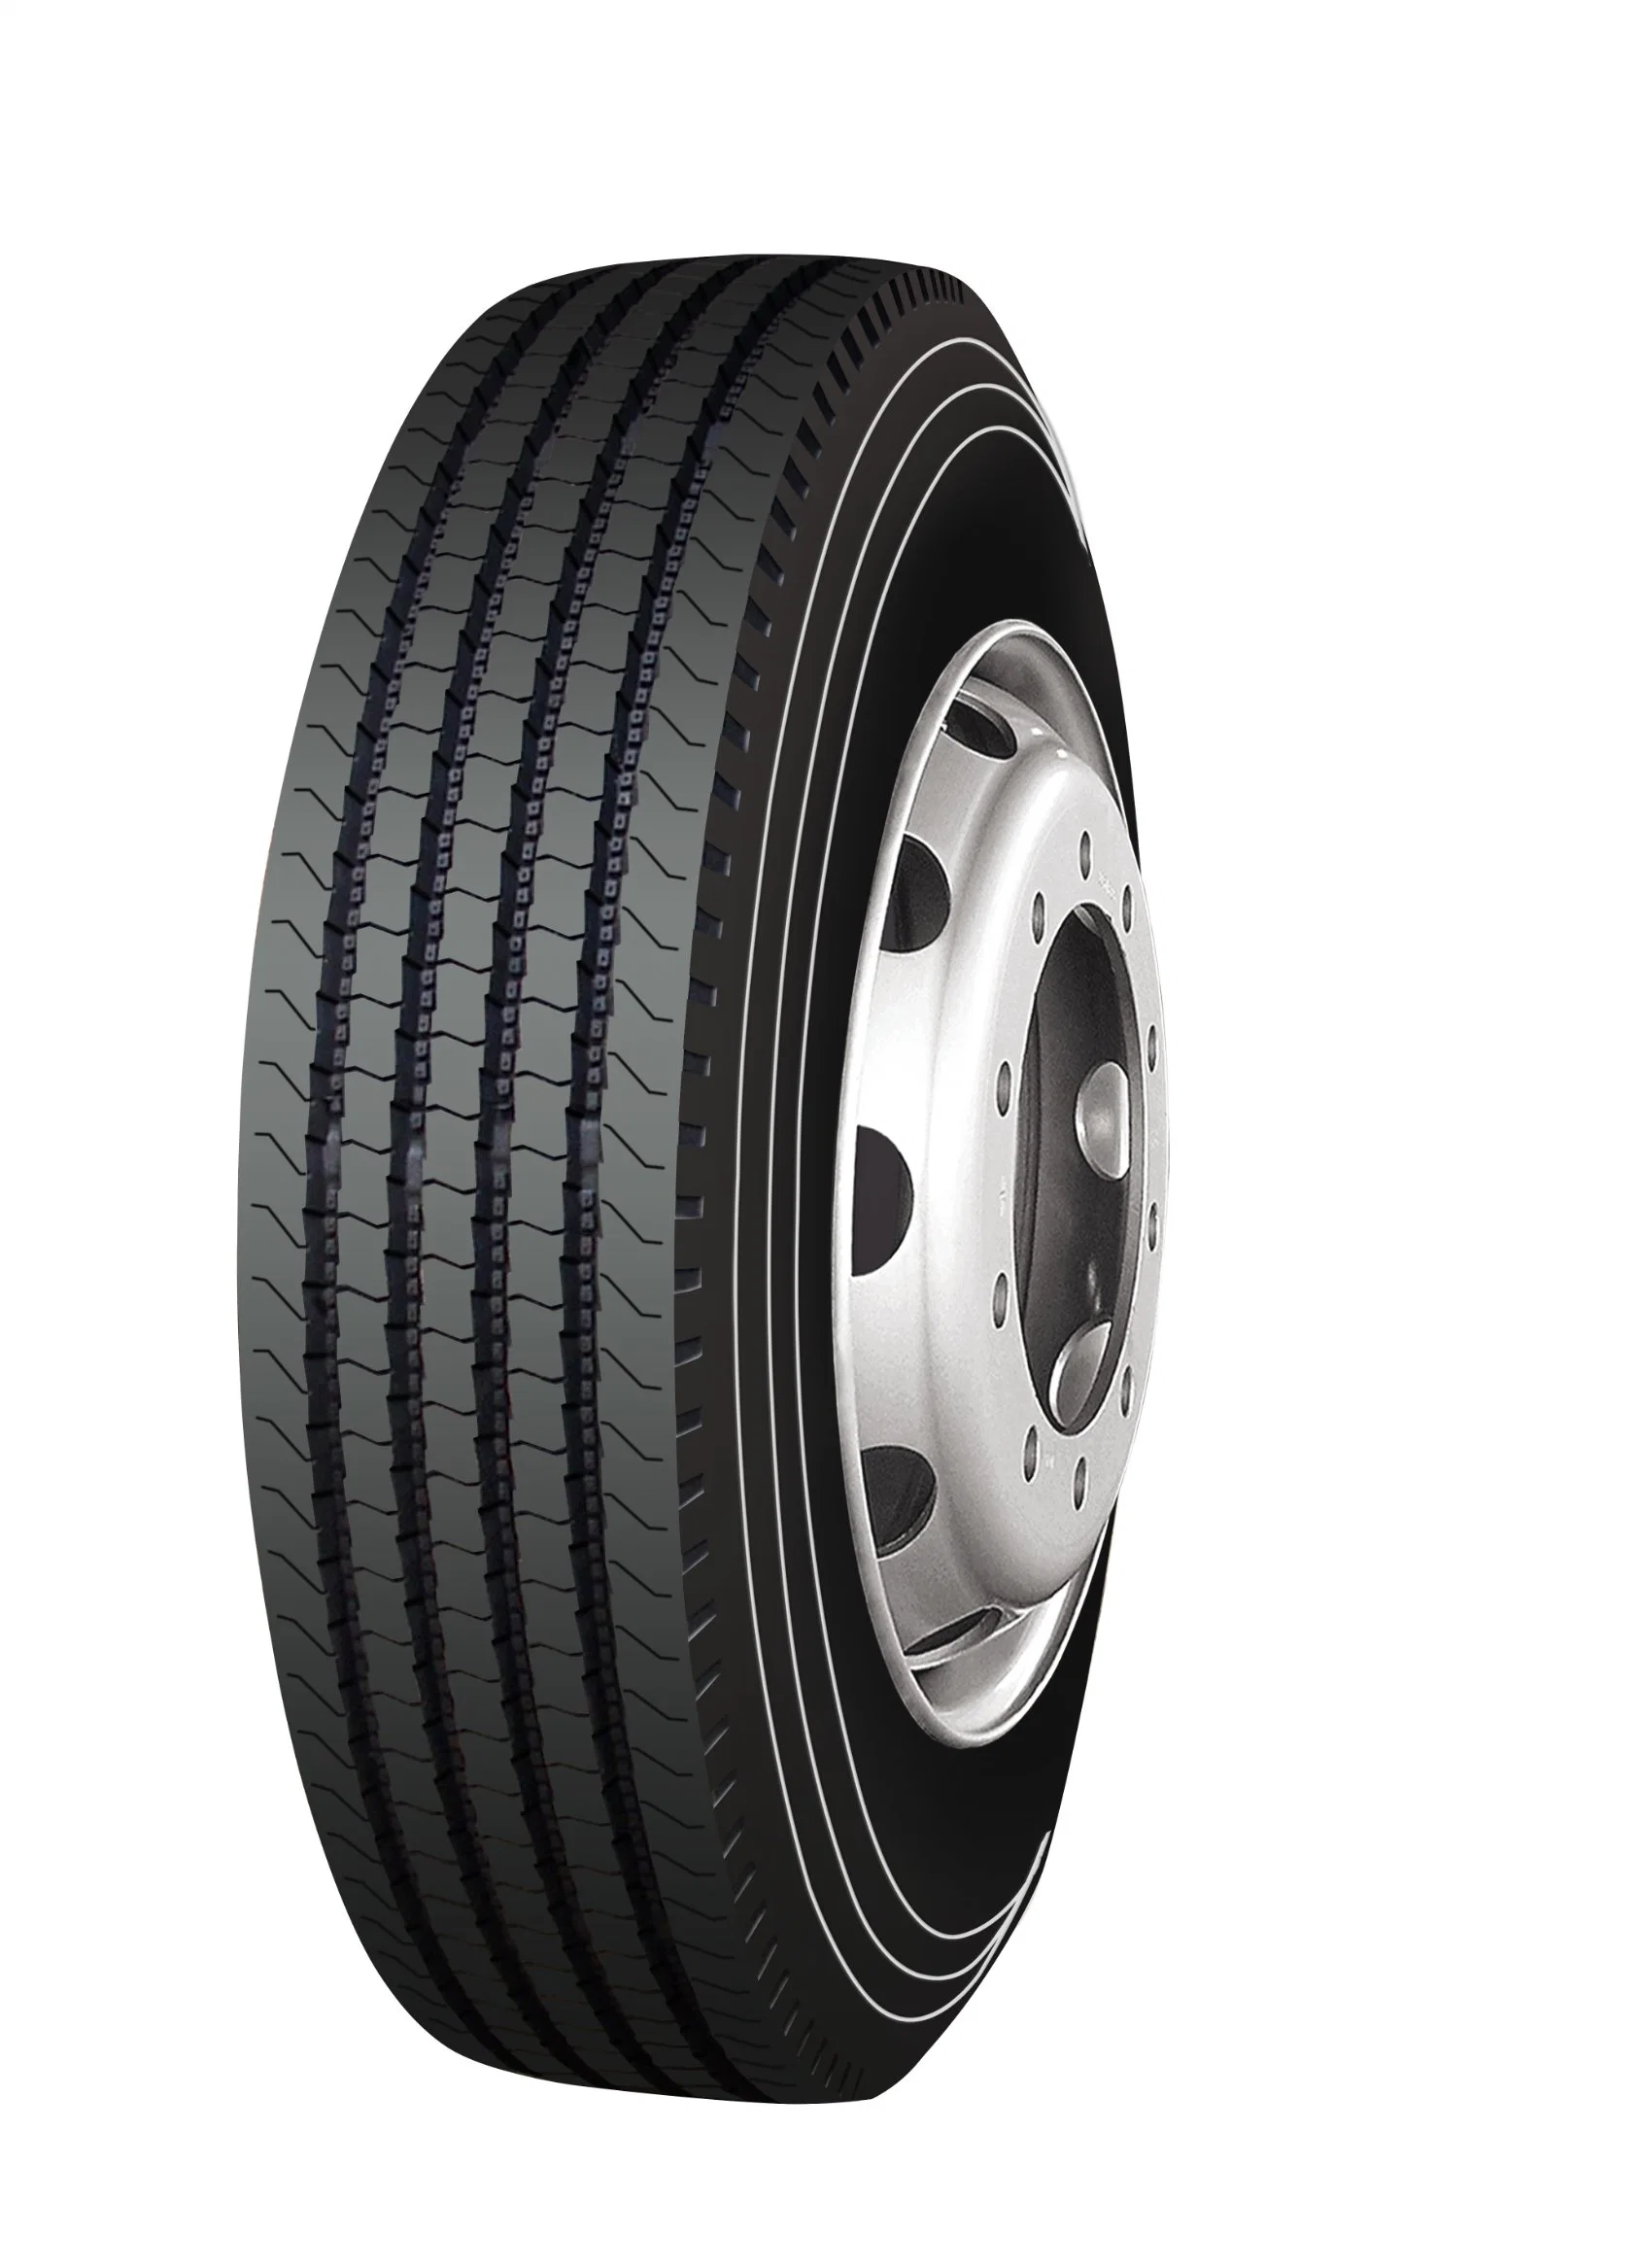 China Long March All Position Radial Truck Tire (12R22.5 LM155)